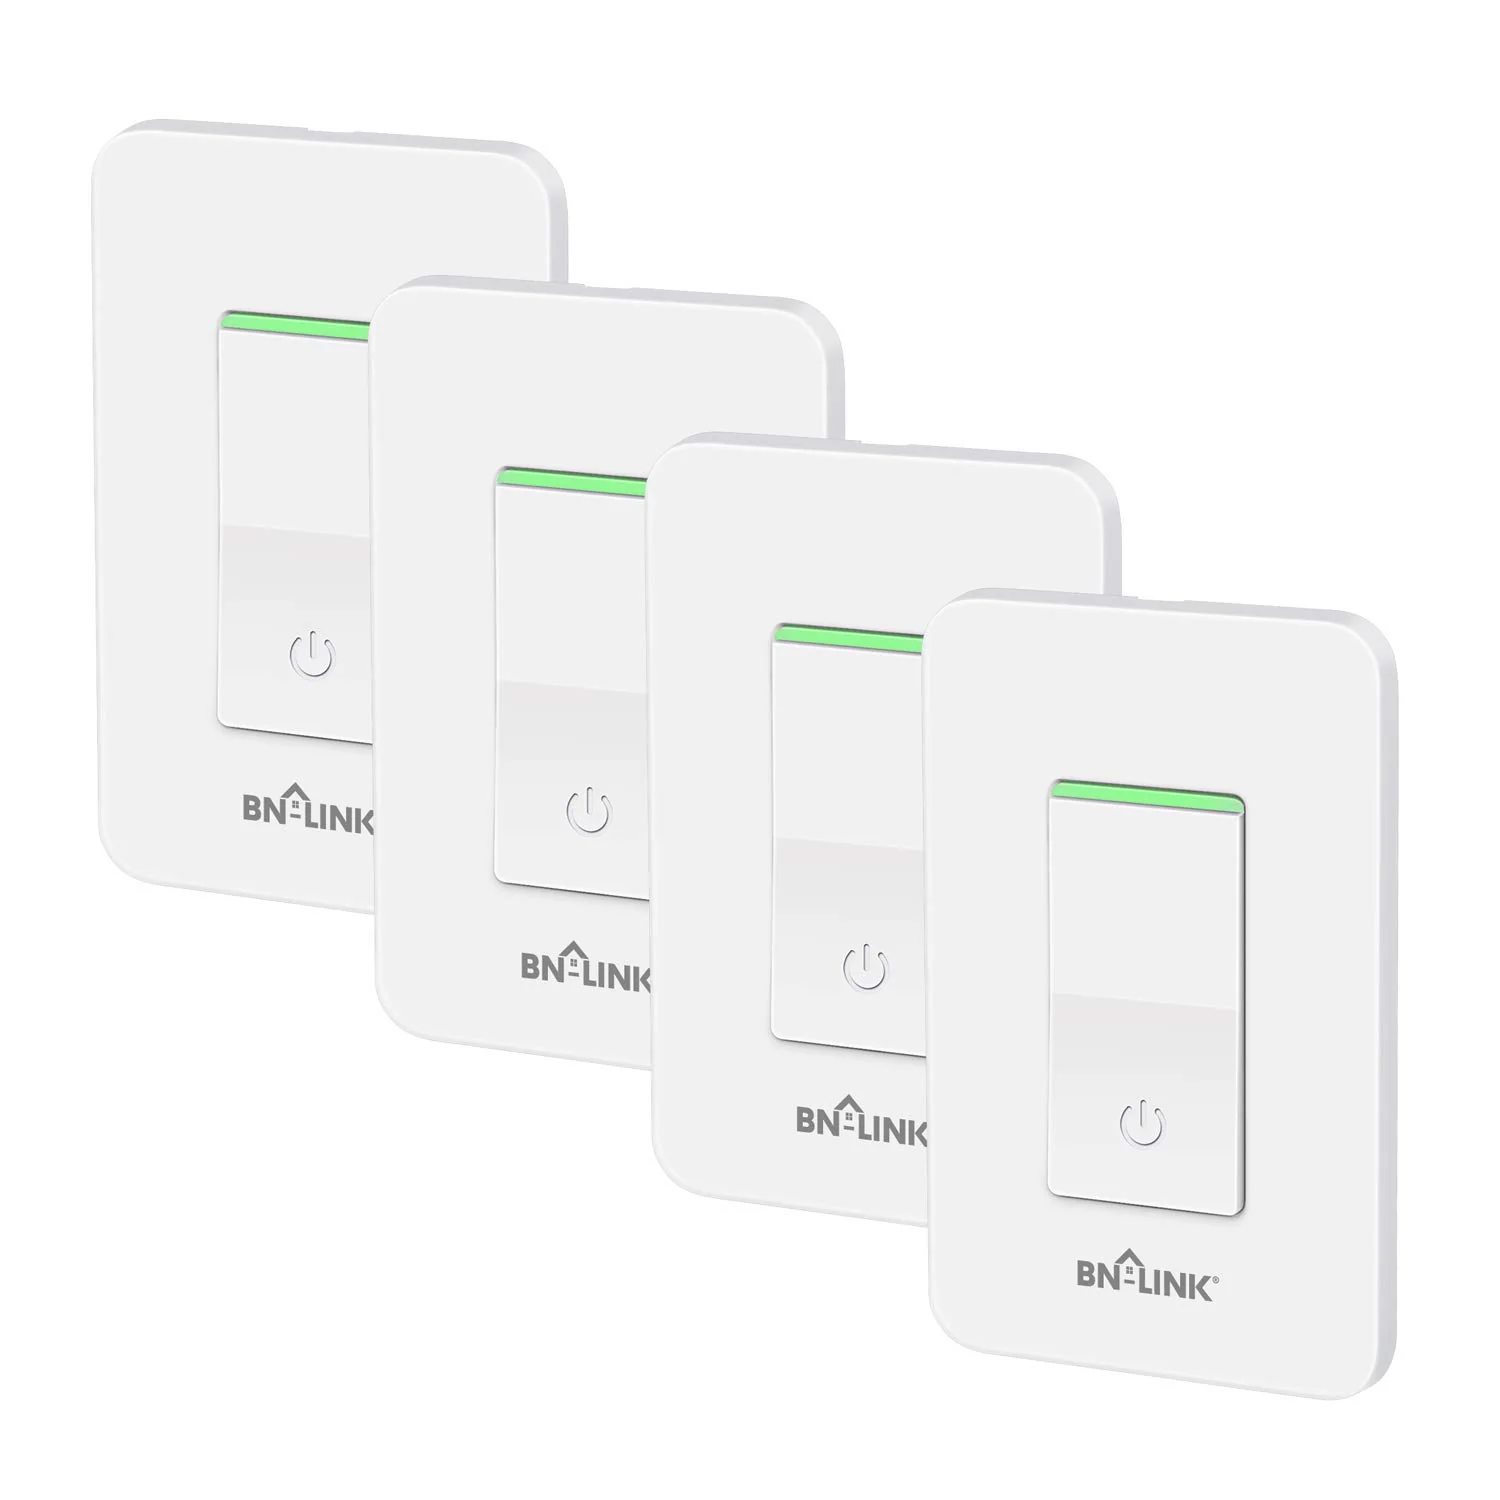 Streamline Your Home Lighting with Bn-Link's WiFi Smart In-Wall Light Switch